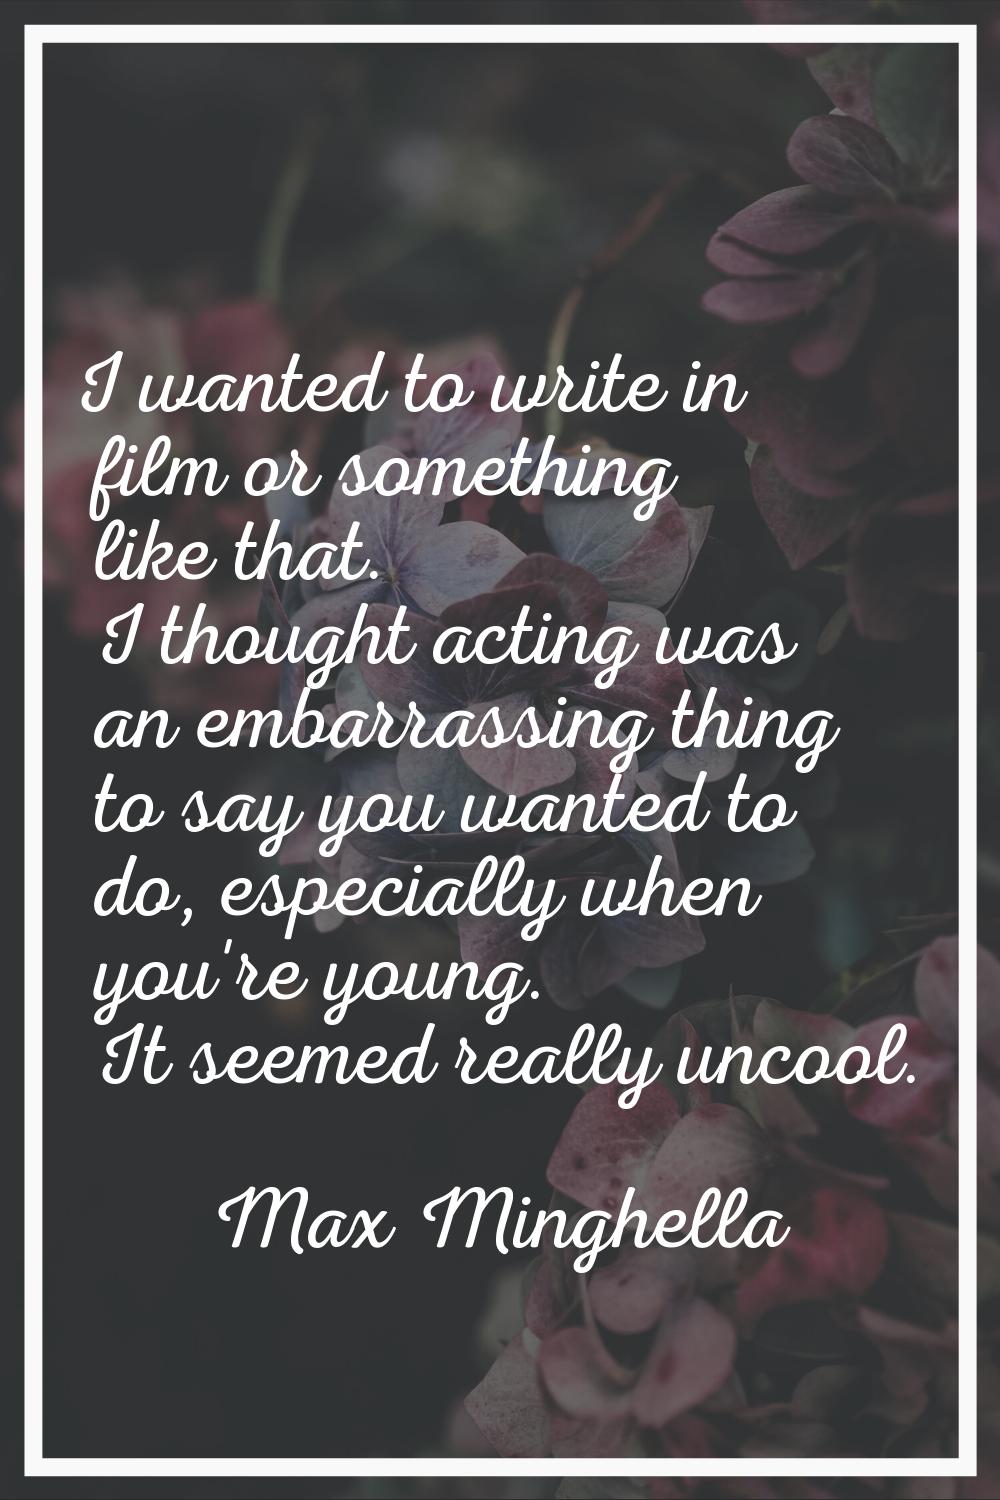 I wanted to write in film or something like that. I thought acting was an embarrassing thing to say